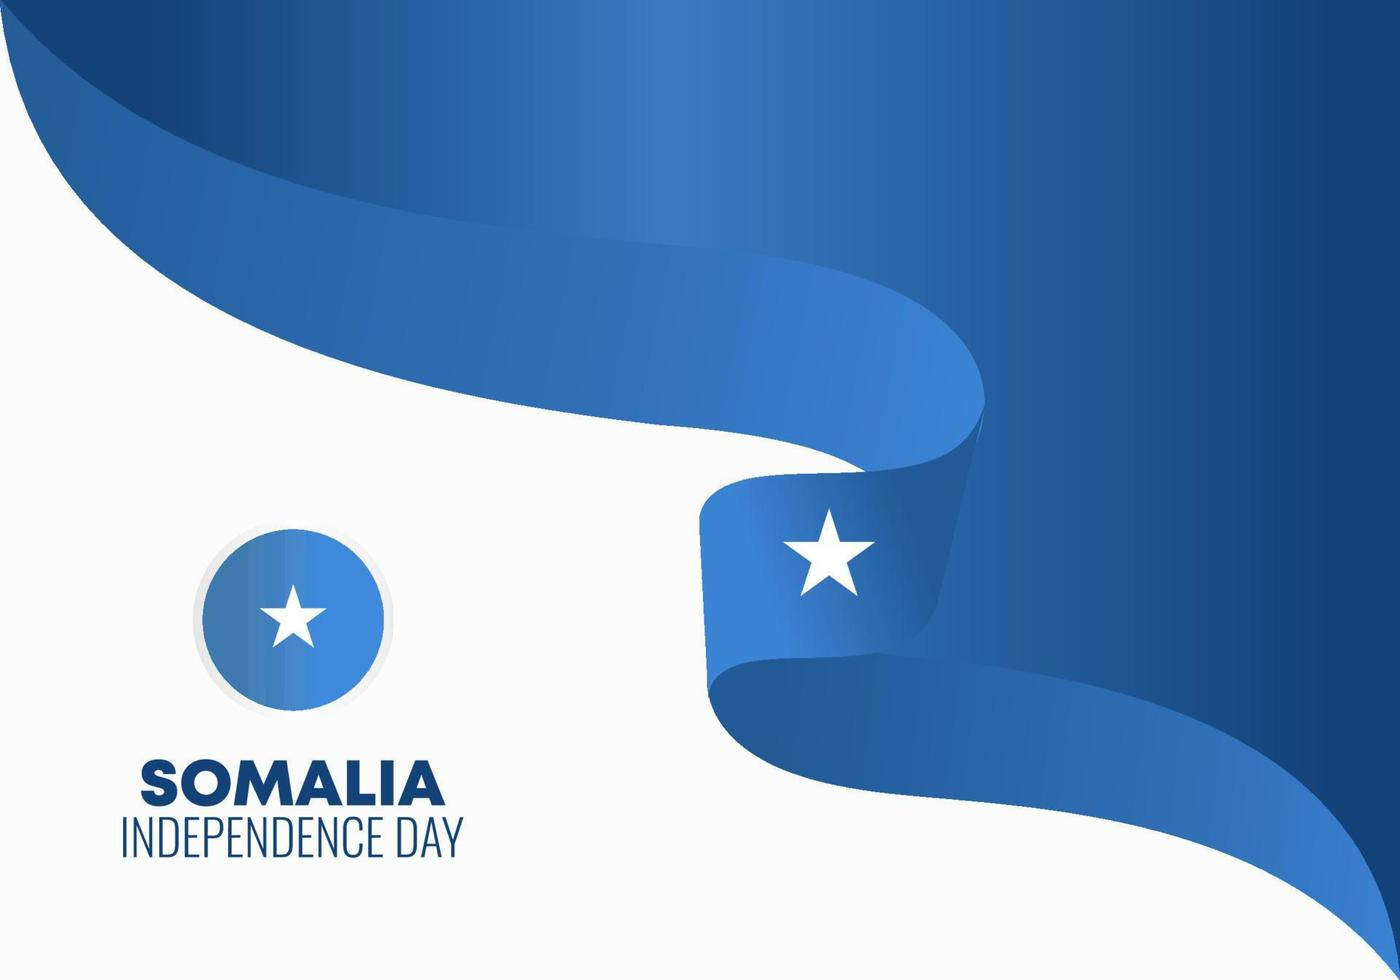 Somalia Independence Day Wallpaper